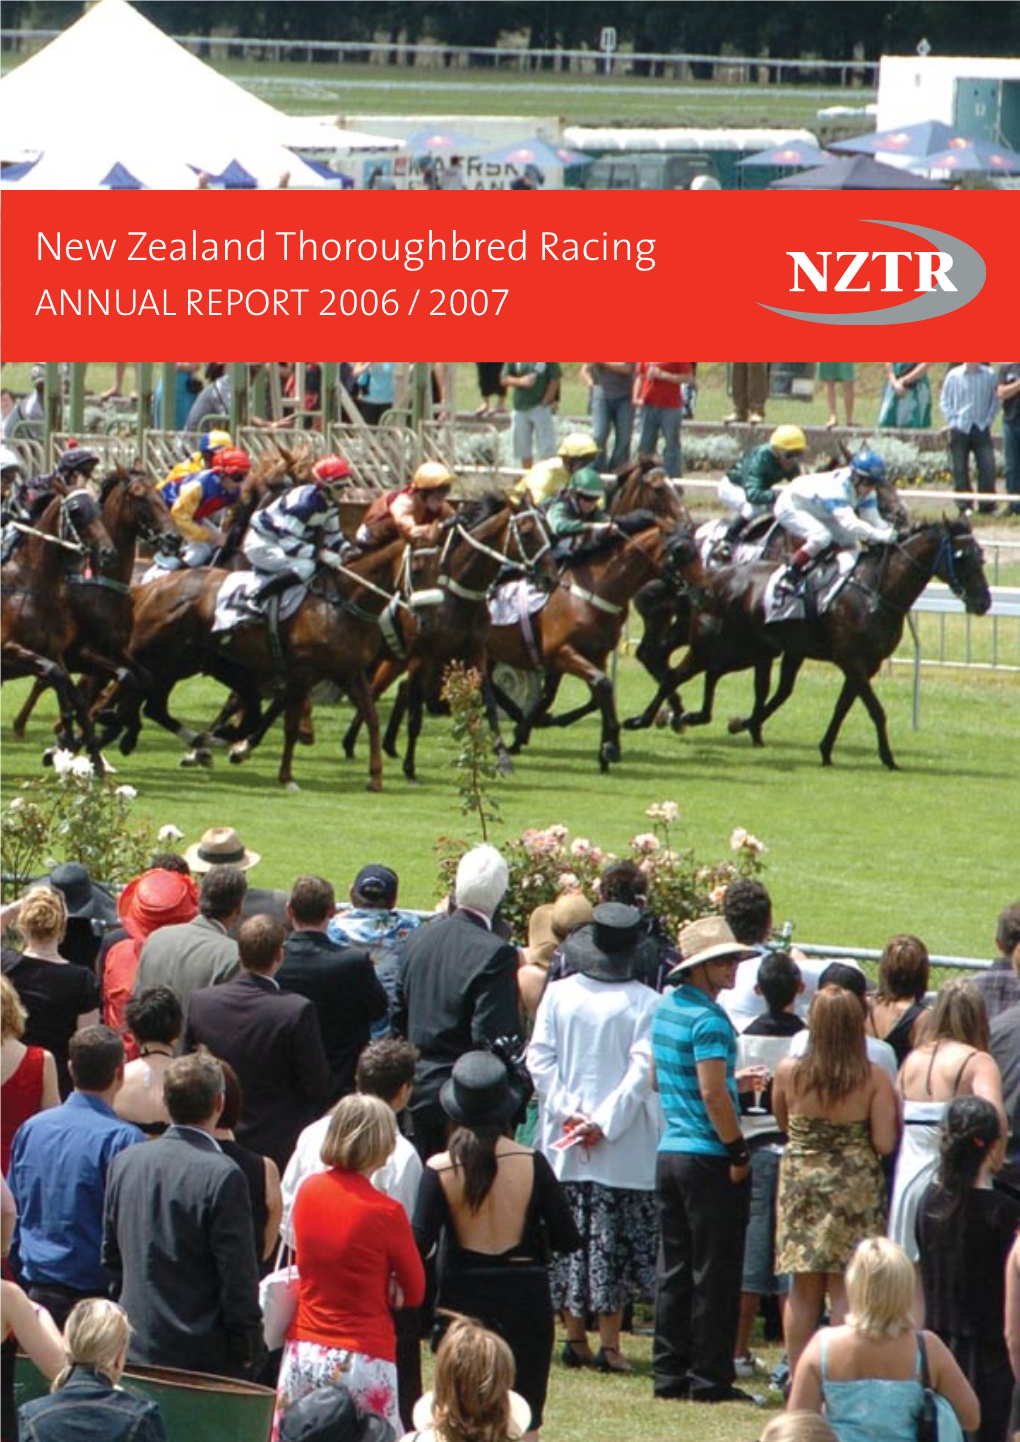 New Zealand Thoroughbred Racing Annual Report 2006 / 2007